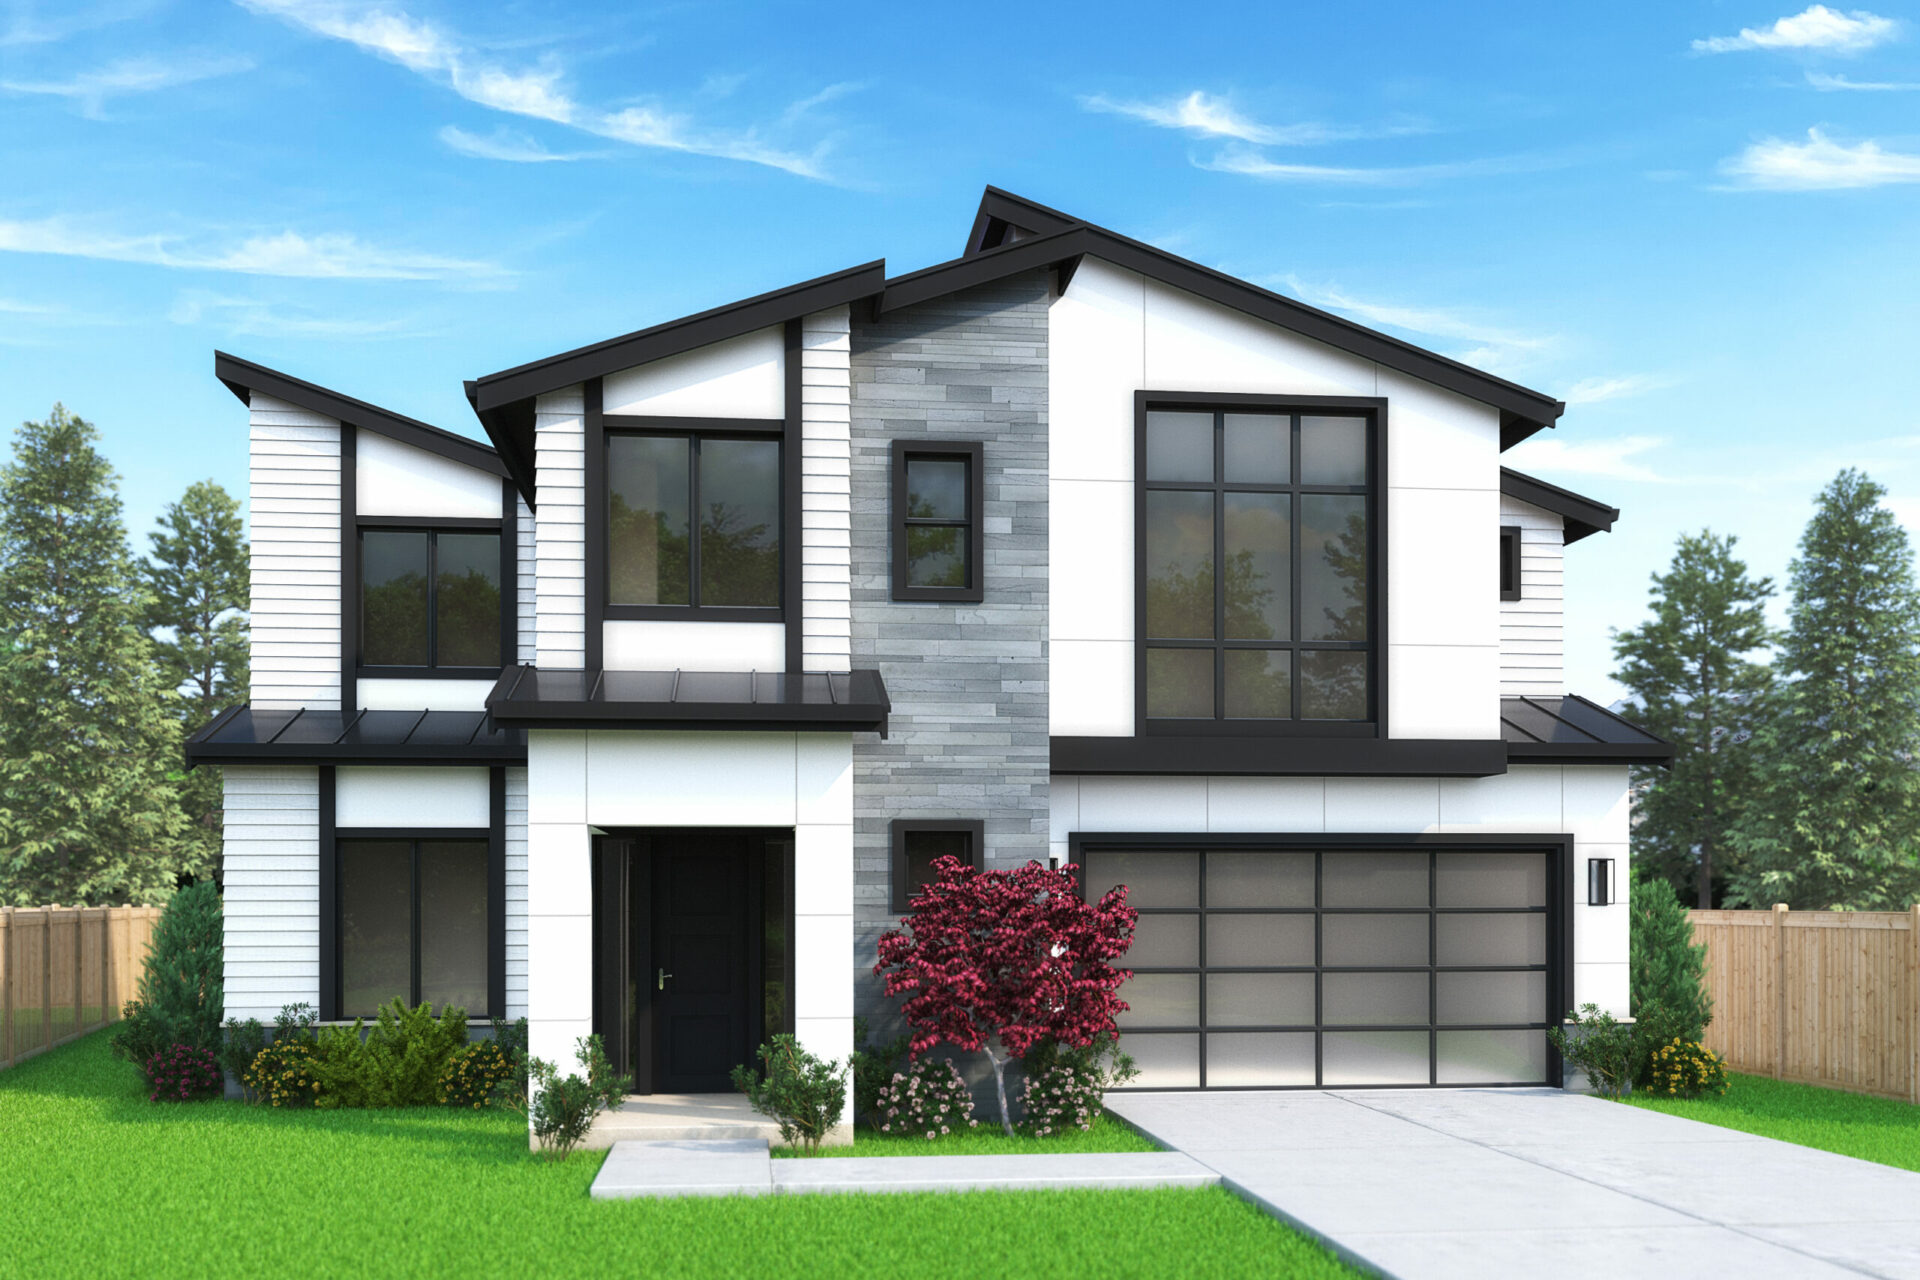 View our new luxury home construction on 7907 127th Pl NE, in Kirkland, WA from MN Custom Home